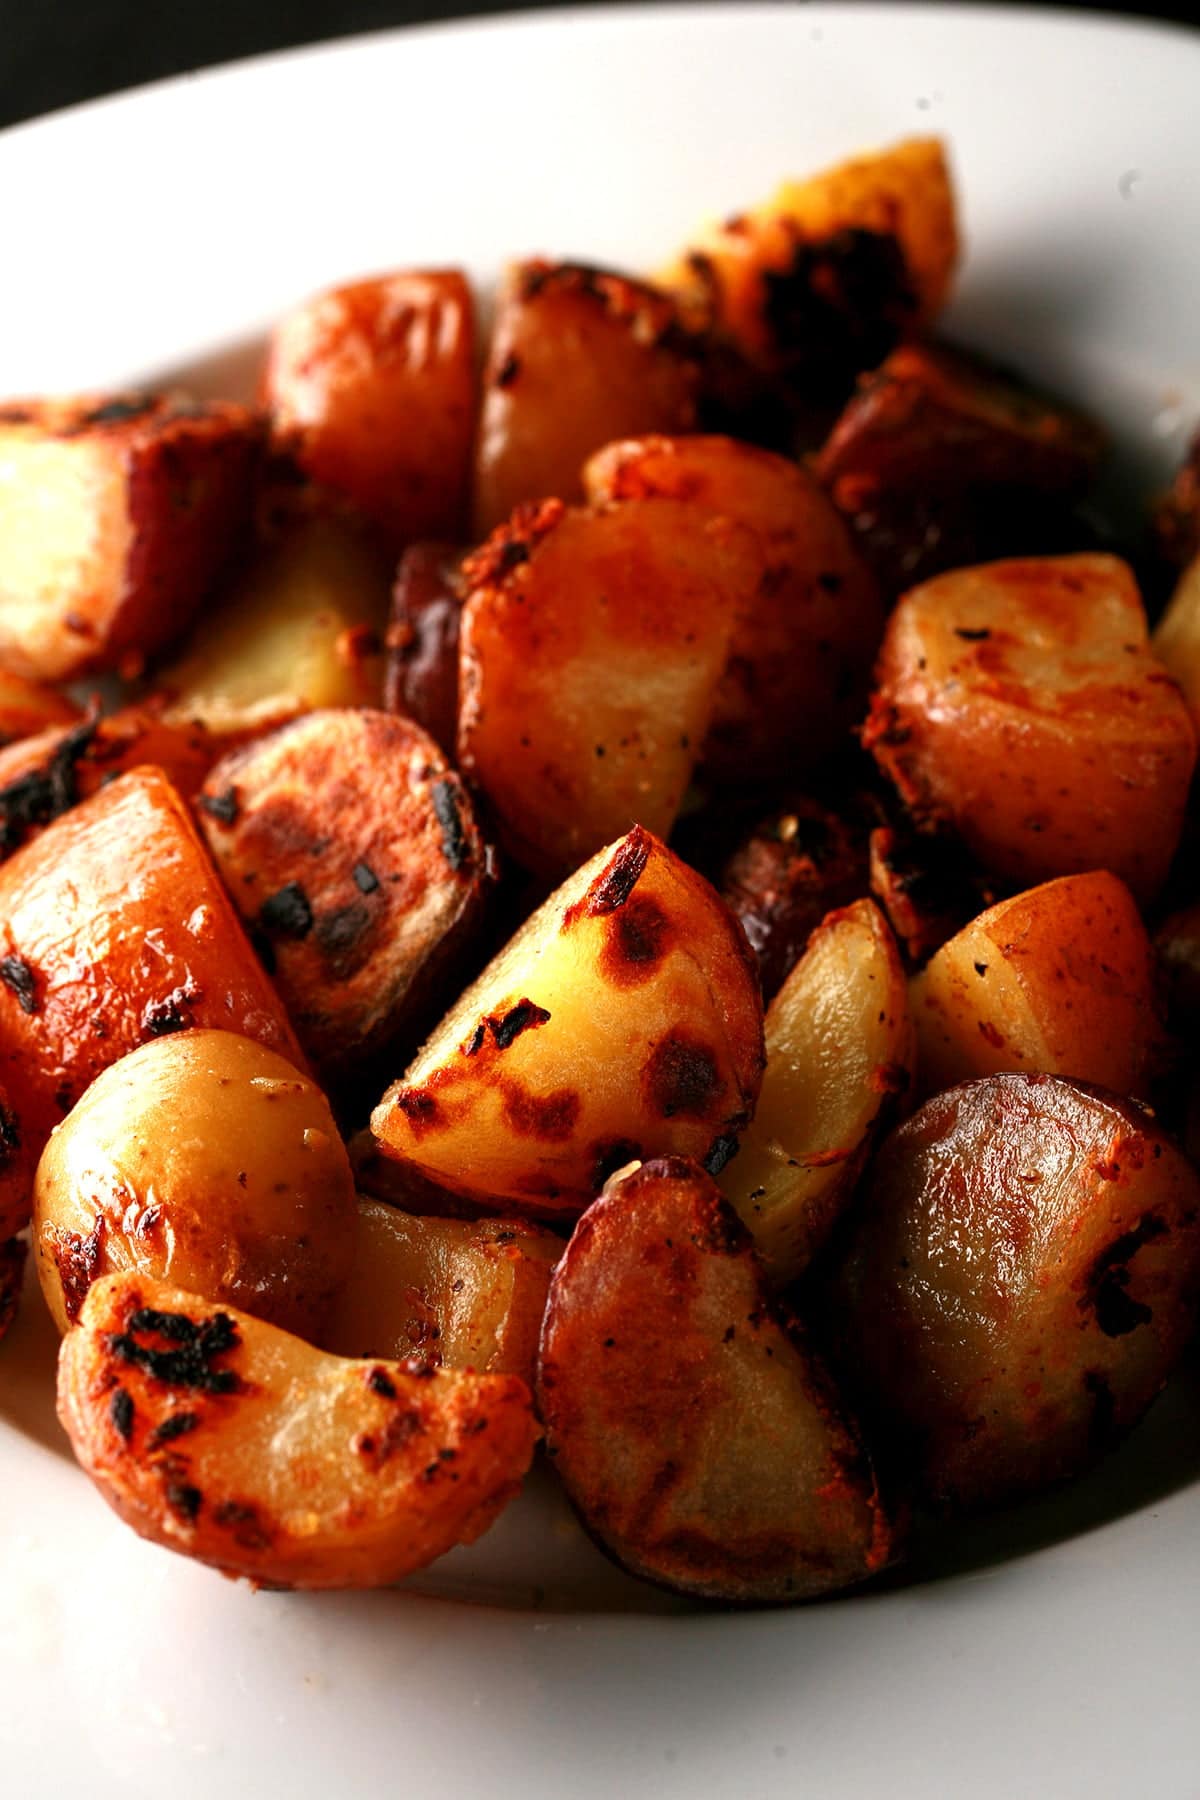 A white plate with a large helping of the BEST breakfast potatoes ever - chunks of red potatoes with charring and blistering on the surfaces.